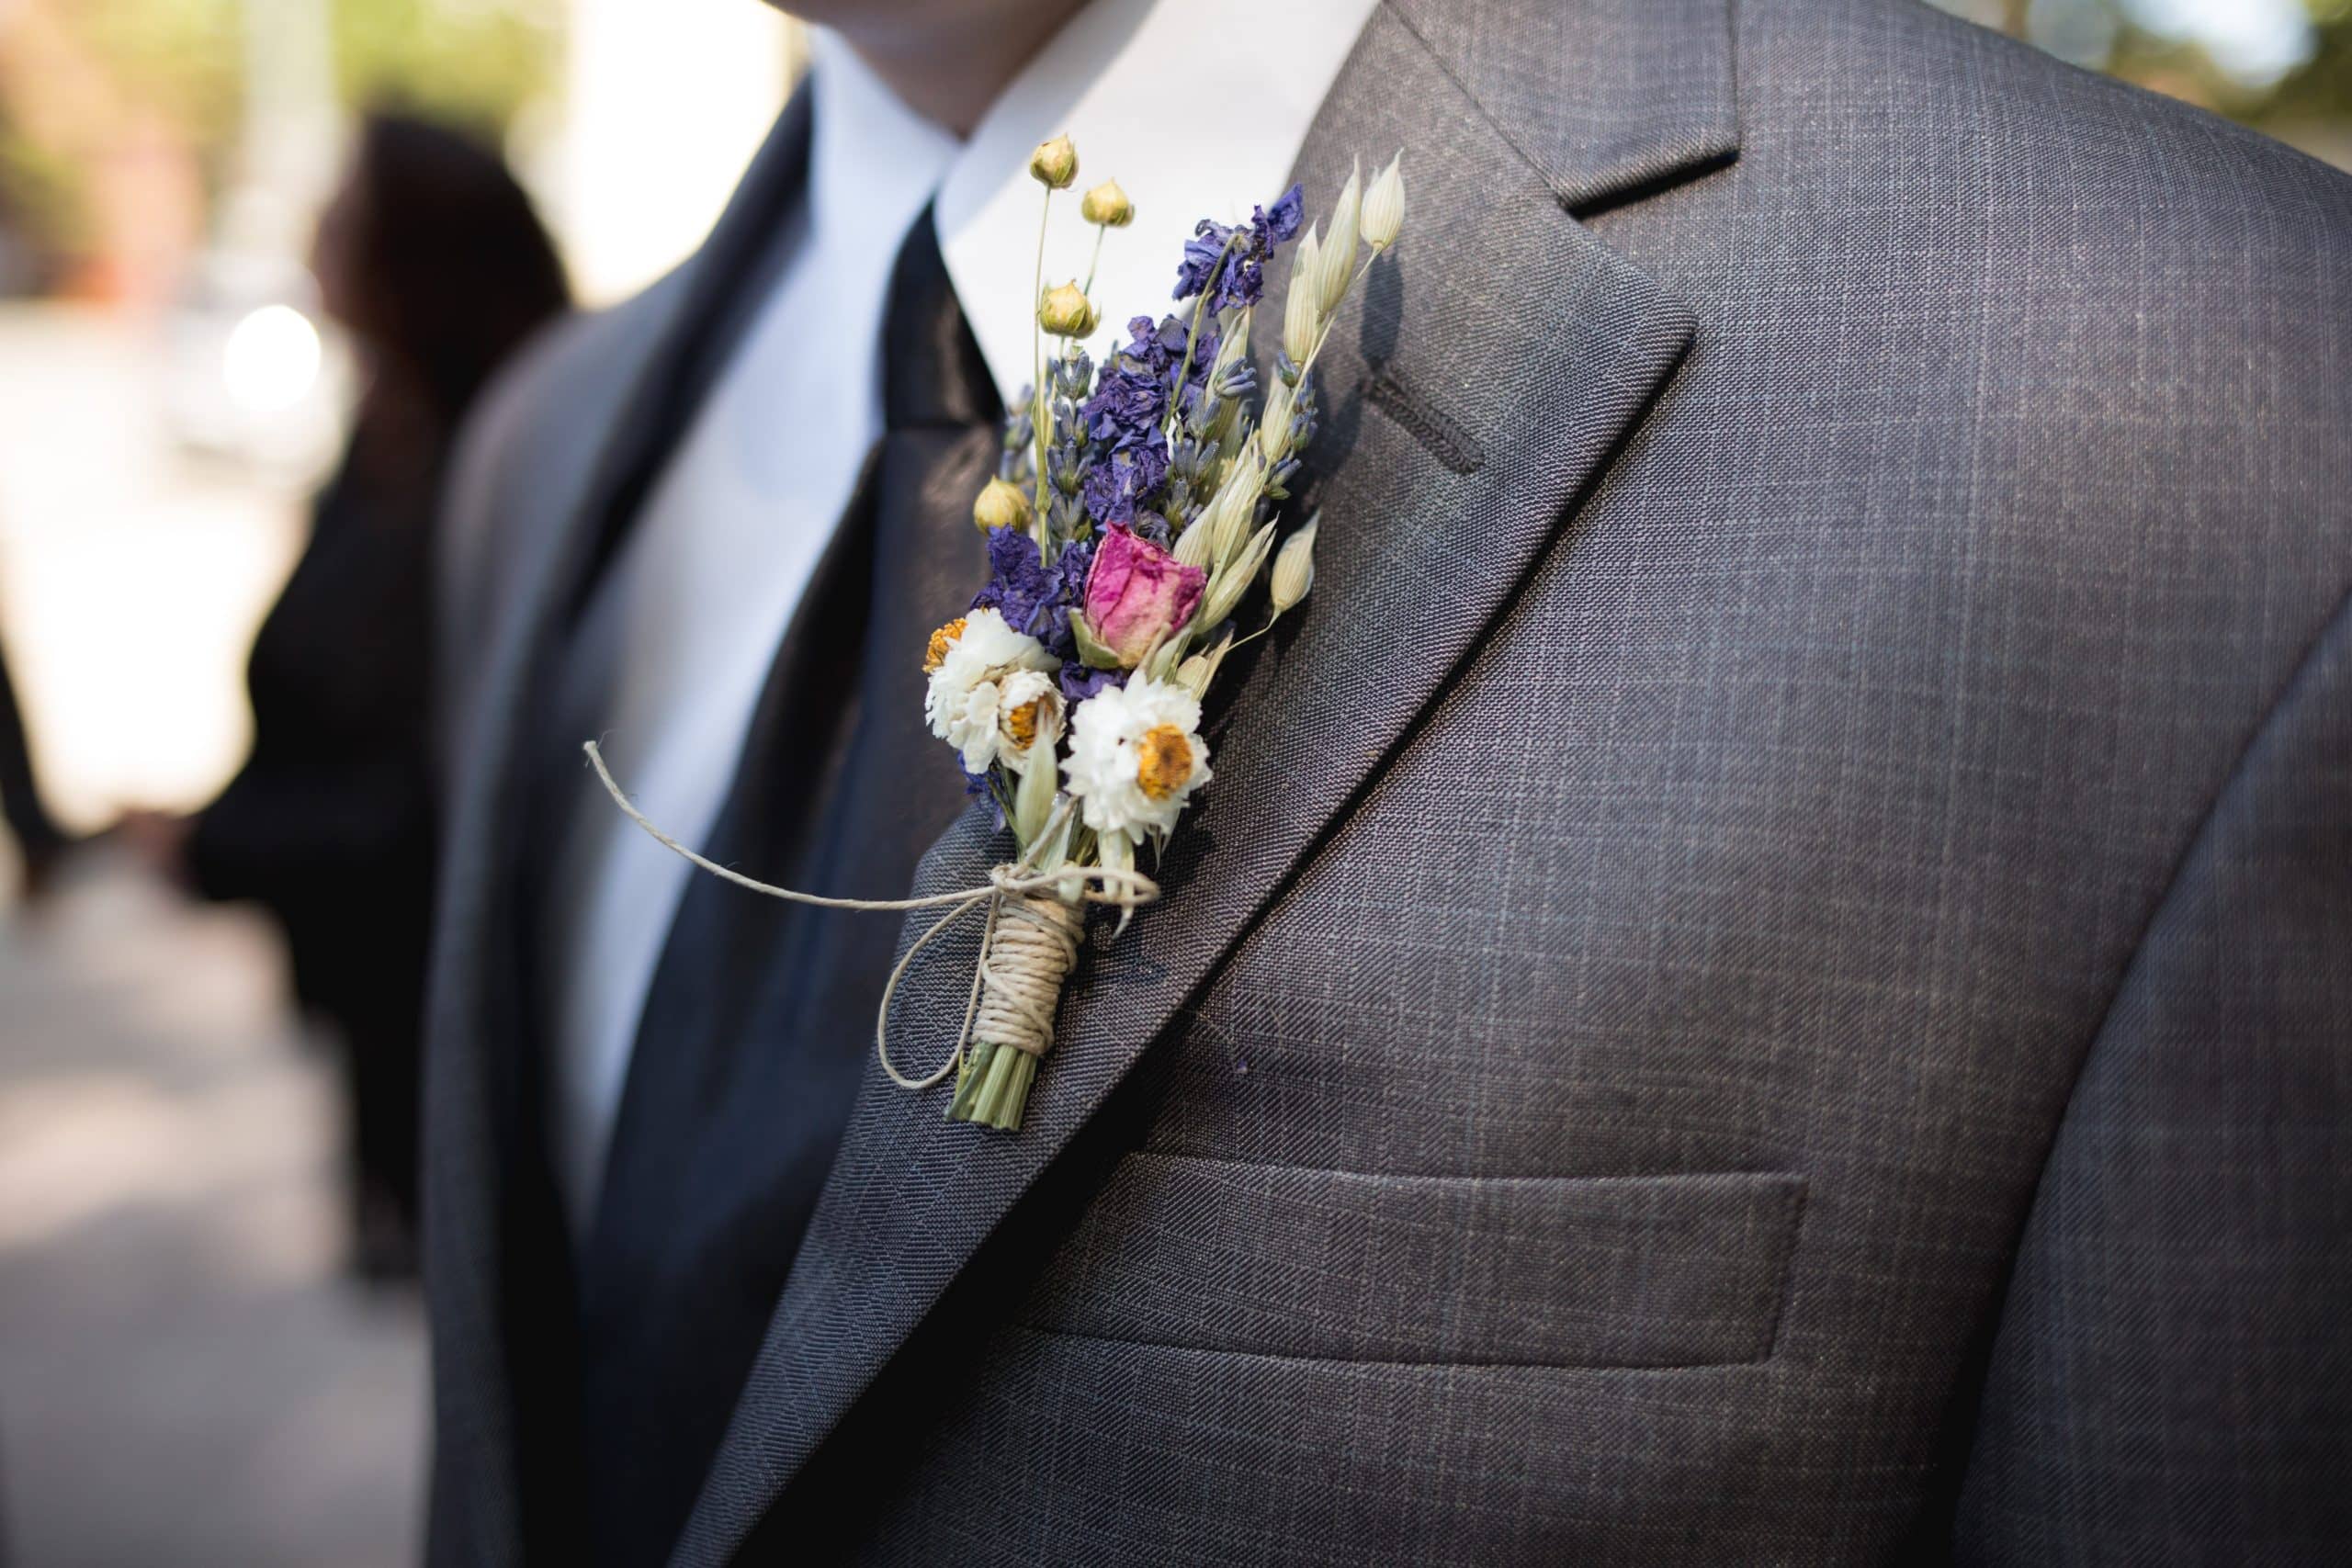 Close-up of a groom's boutonniere